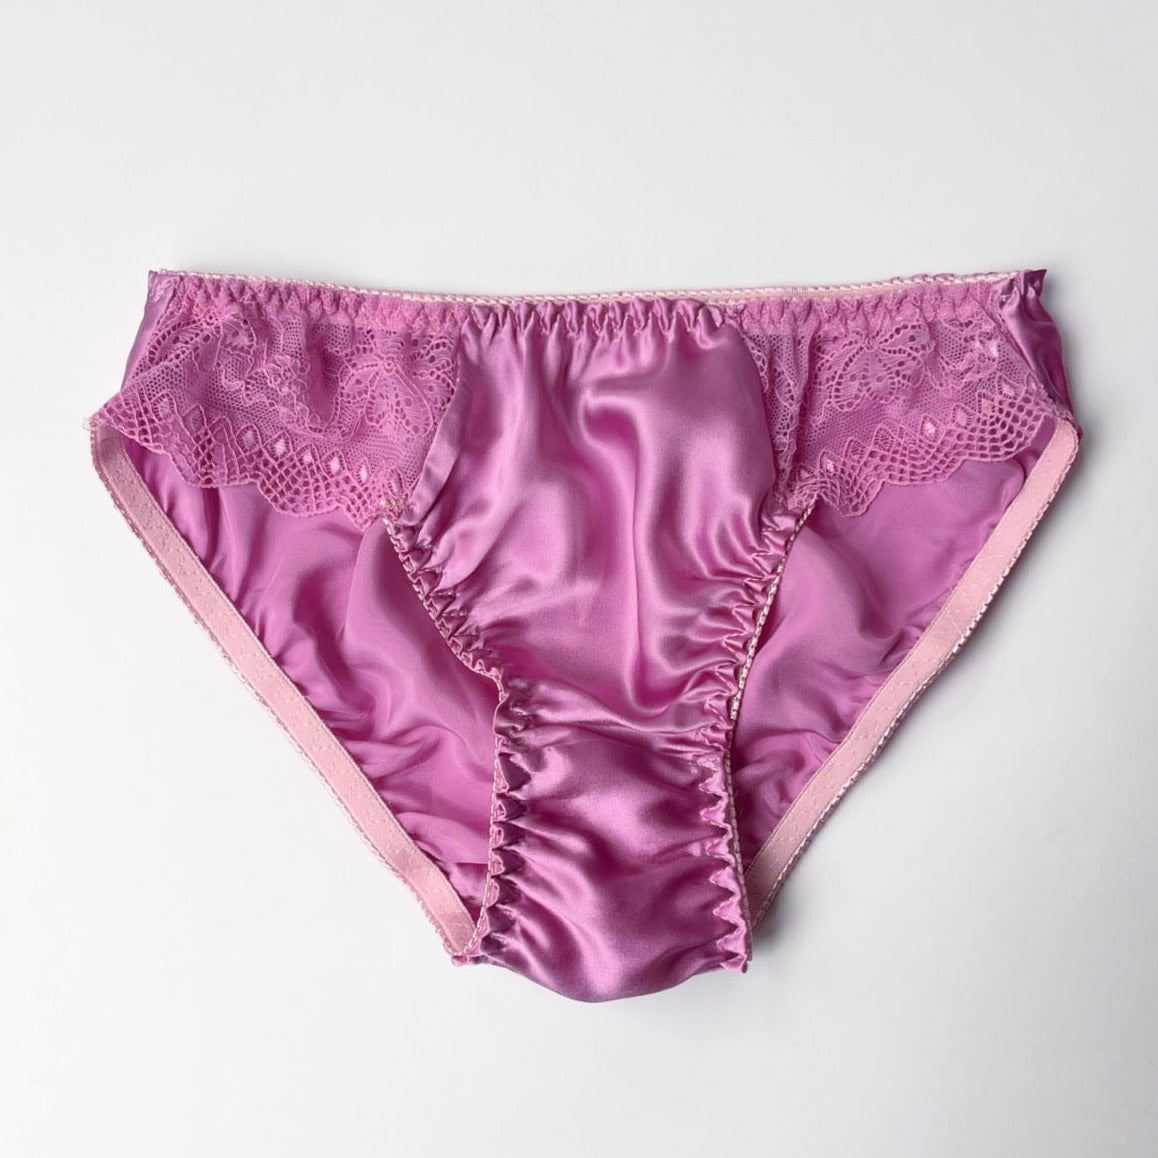 pink pure silk underwear for women, silk panties, made in Canada silk lingerie and apparel